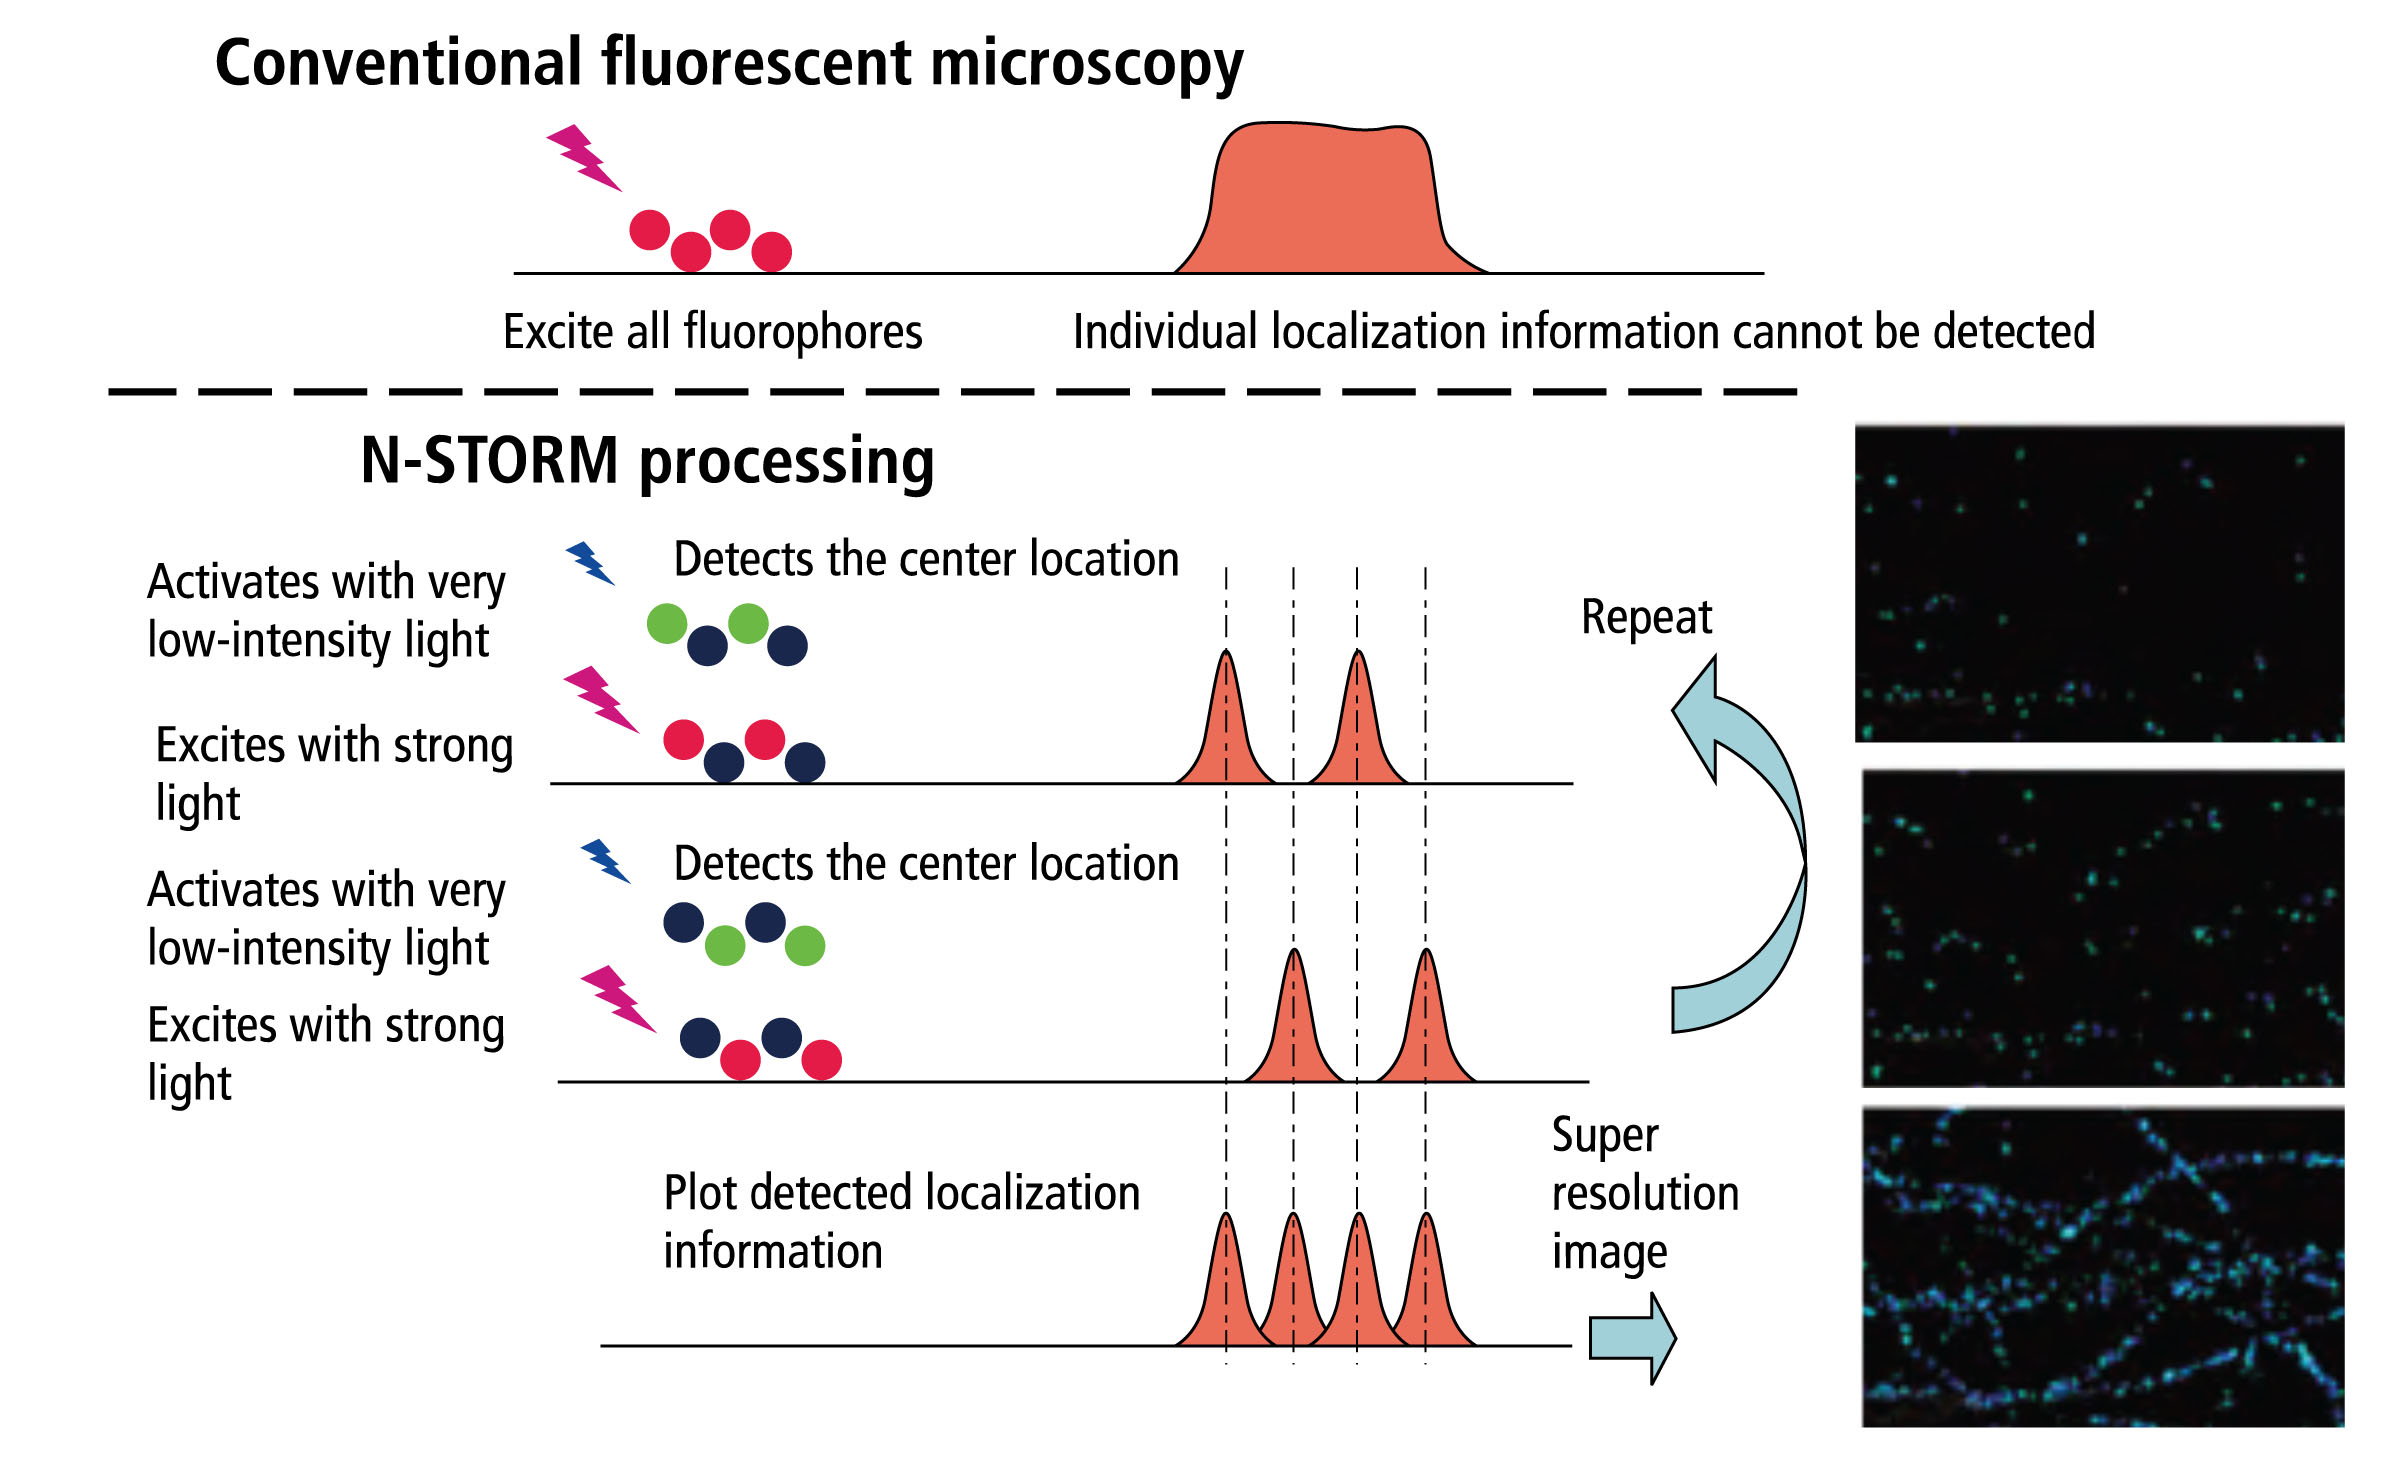 Comparing Microscopy Techniques: This image contrasts conventional fluorescent microscopy with STORM processing, highlighting how STORM achieves superior resolution by activating and precisely localizing individual fluorophores, leading to detailed super-resolution images.